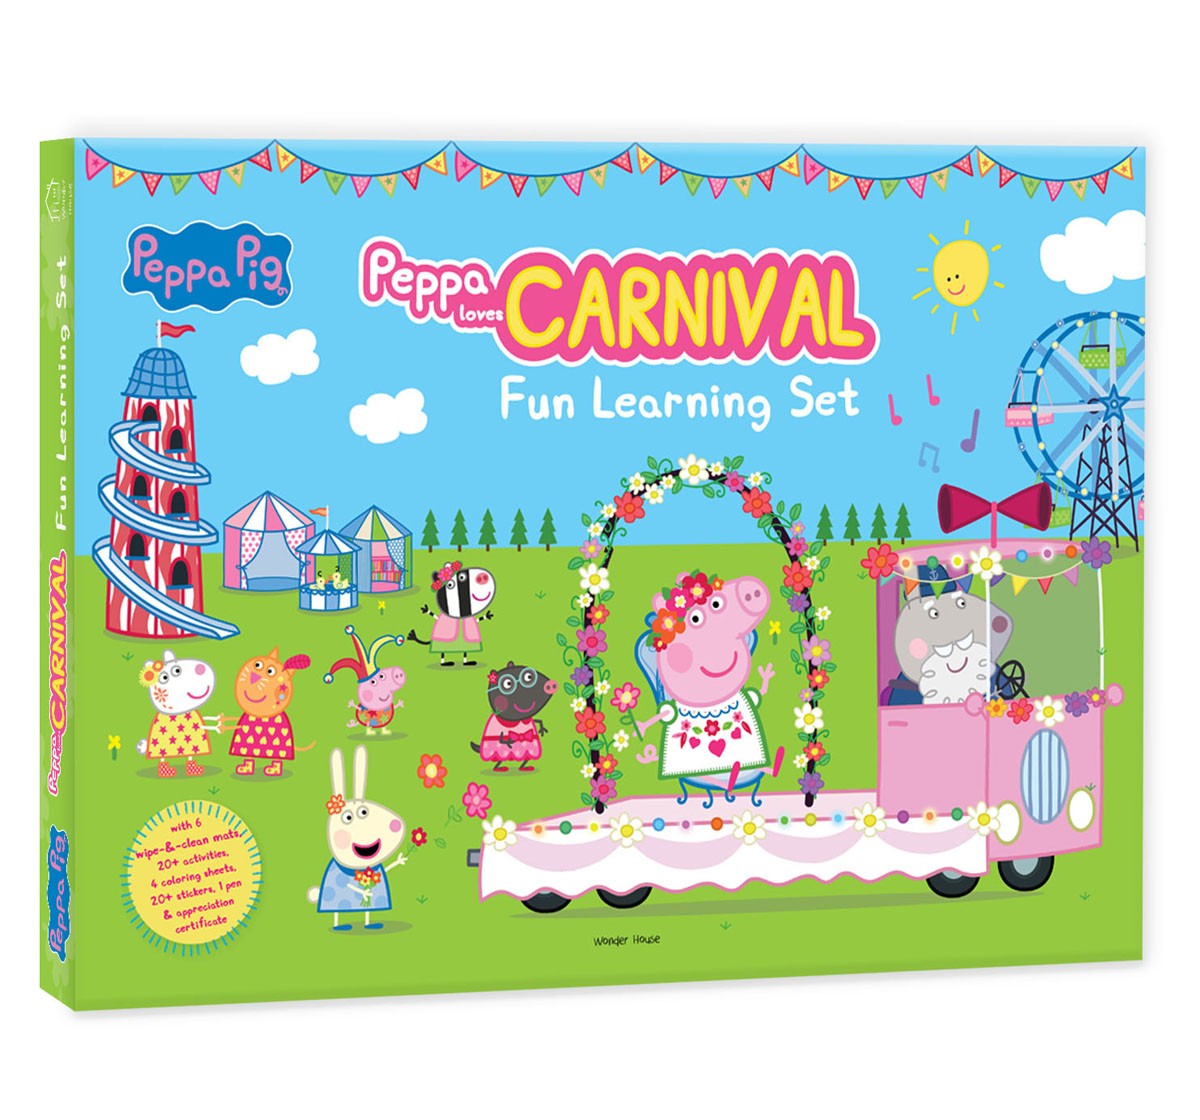 Wonder House Books Peppa Loves Carnival Fun Learning Activity Set for kids 3Y+, Multicolour